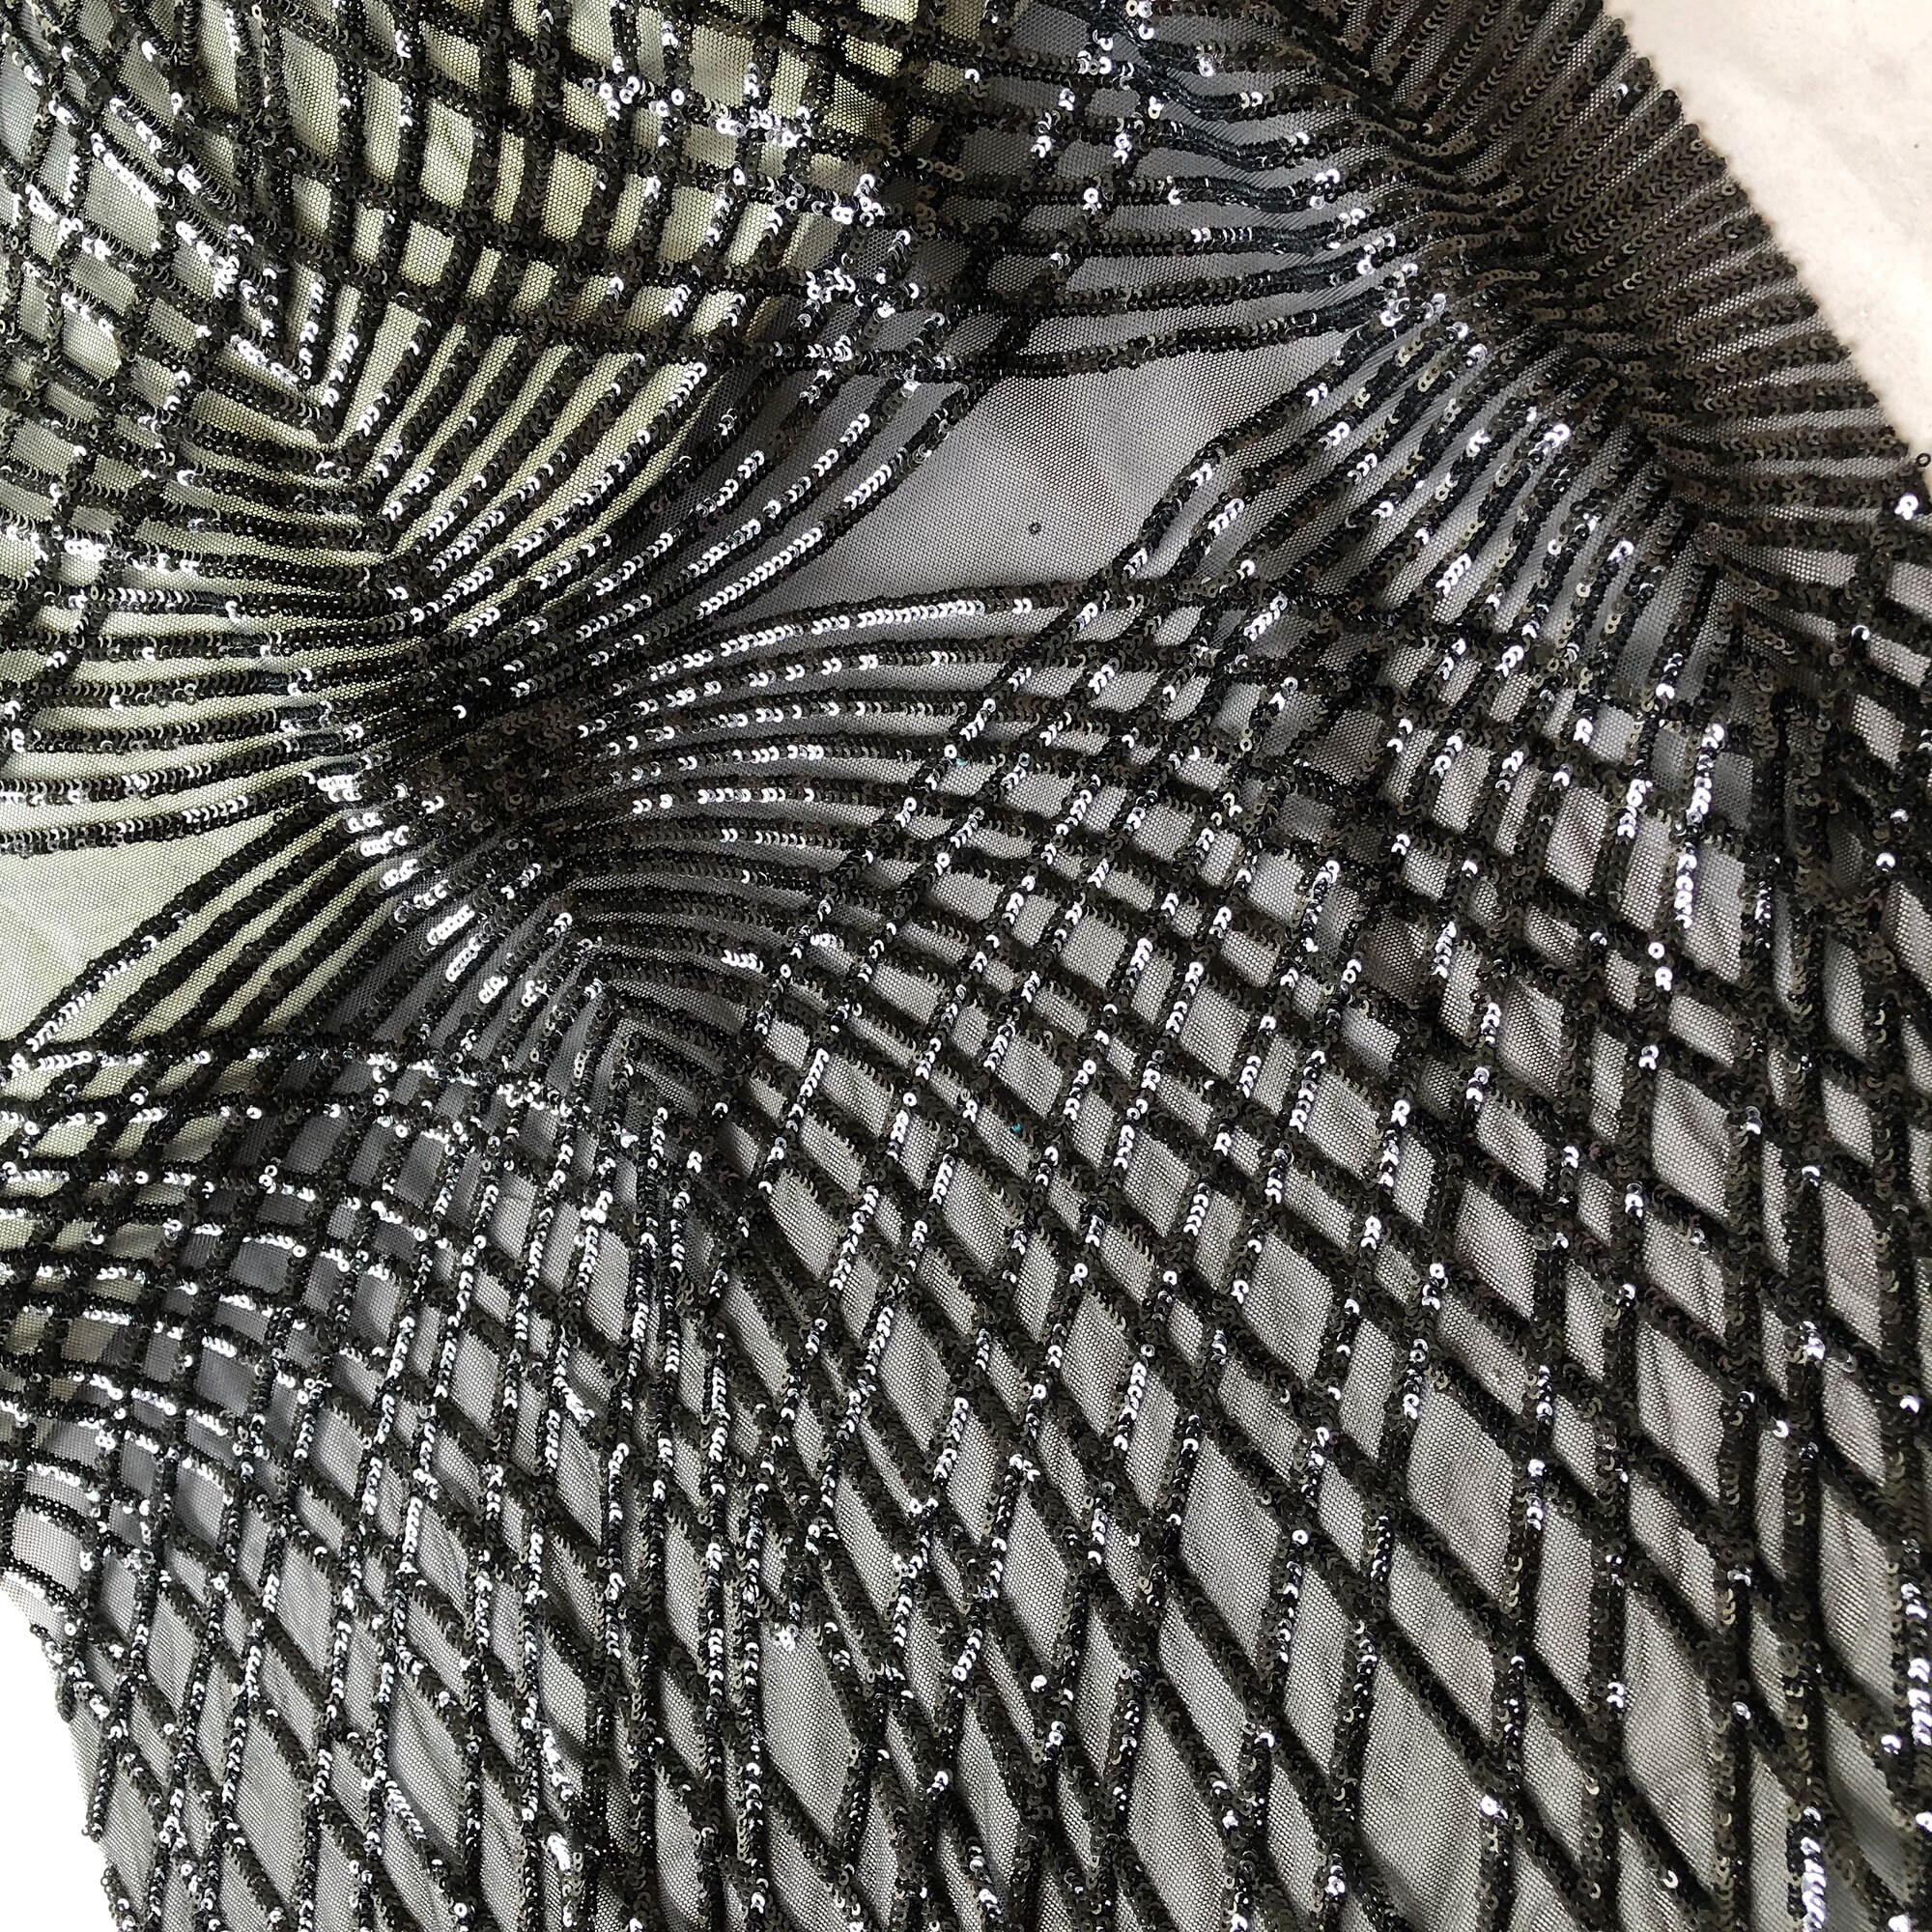 Black Sequined Lace Fabric by the Yard Shimmery Sequin Lace - Etsy